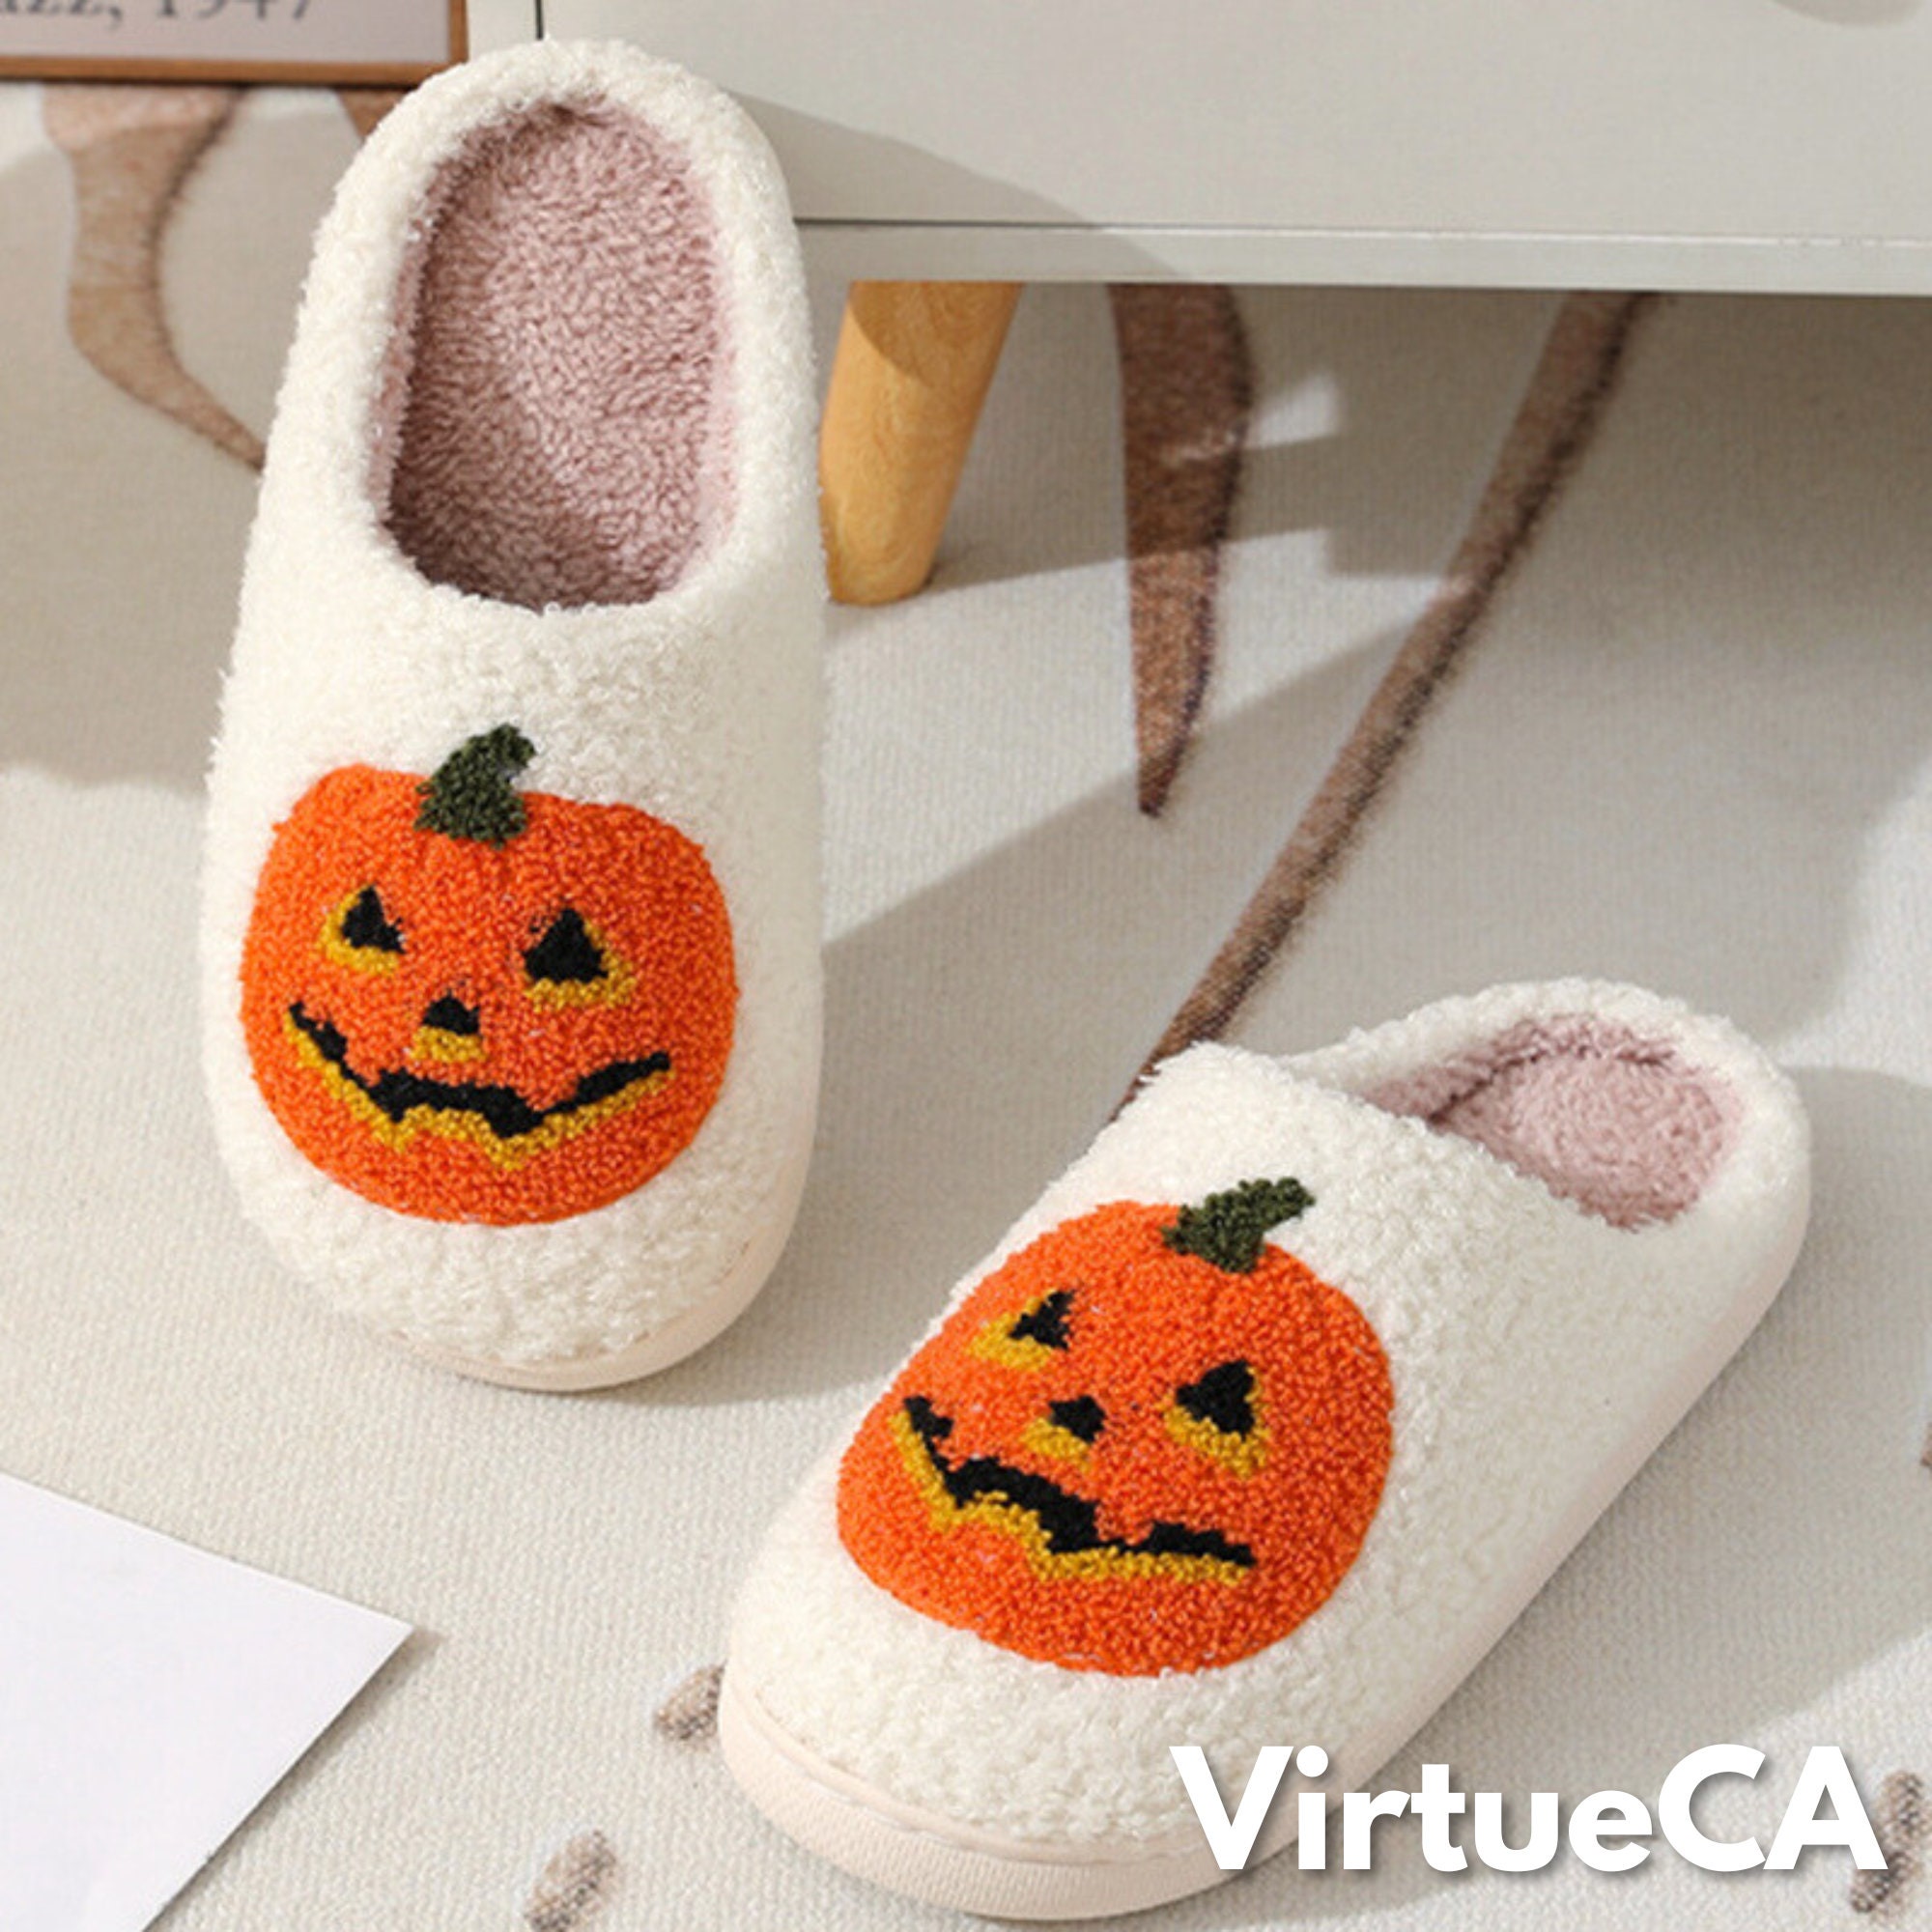 Discover Cute Halloween Pumpkin Slippers, Spooky Autumn Slippers, Warm Comfy Winter Slippers, Jack O' Lantern Slippers, Fluffy Gifts For Her